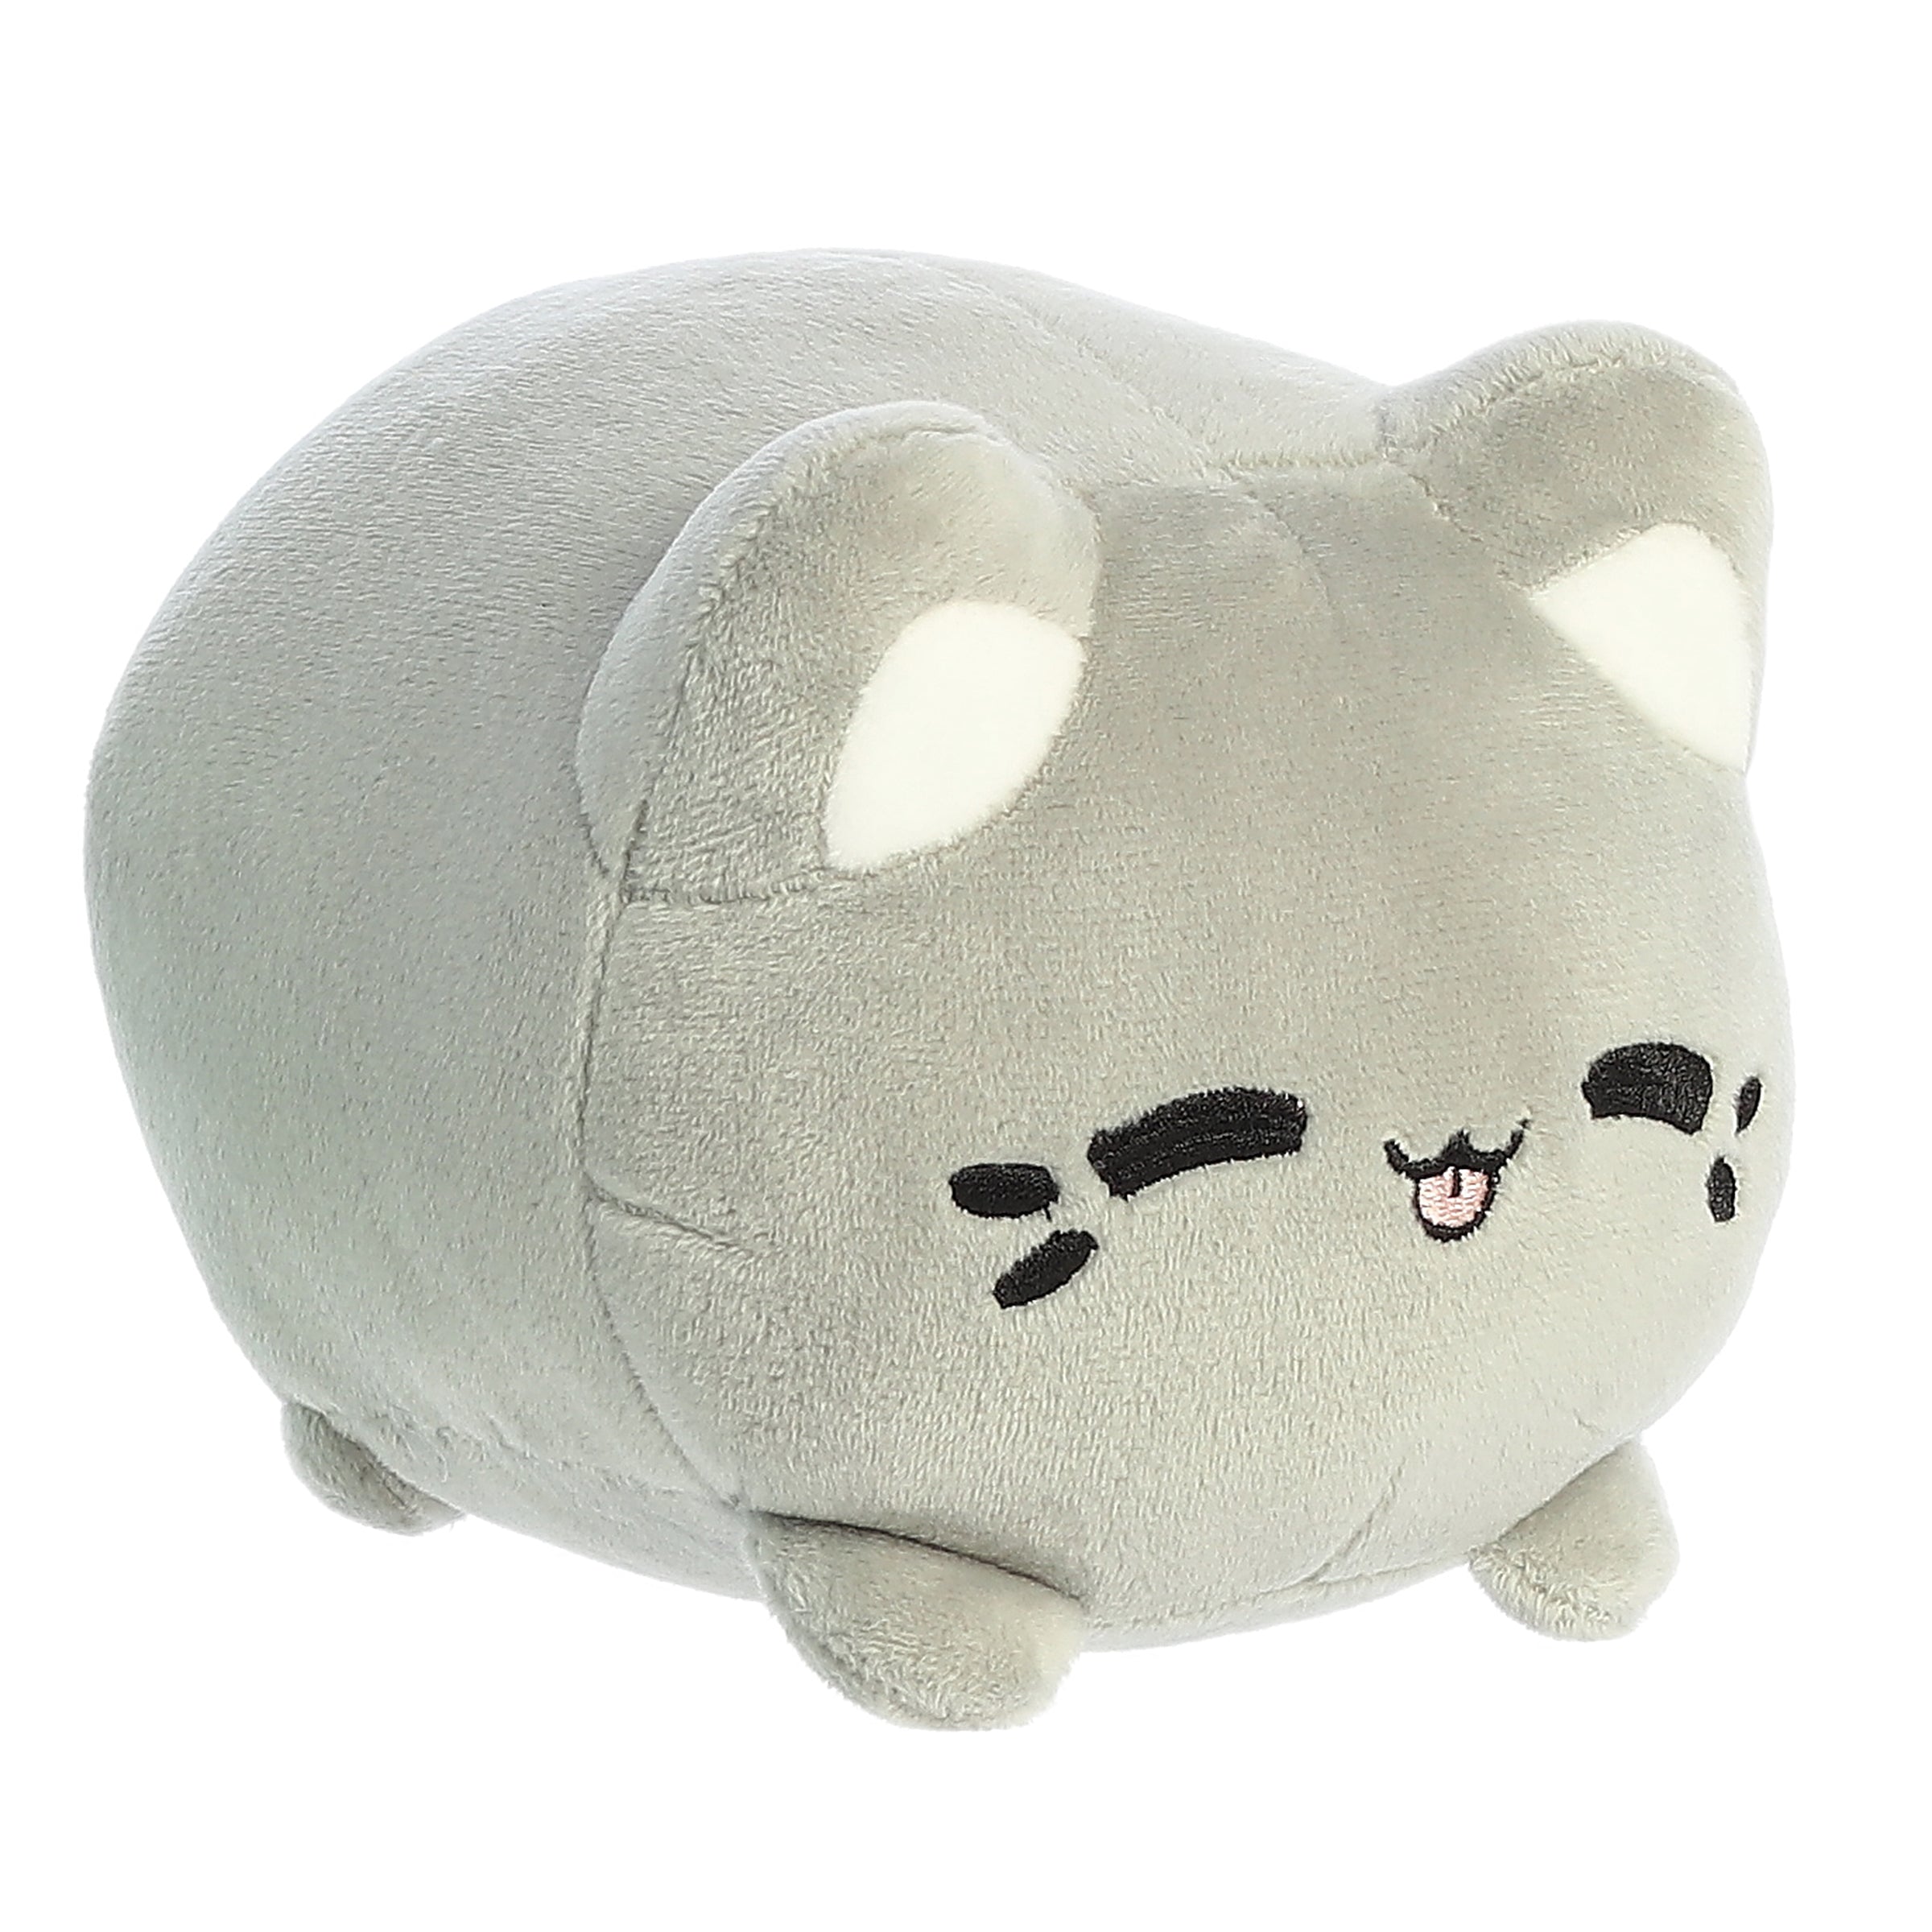 A gray Tasty Peach Meowchi plush that is a round cylinder shape with the resemblance of an animated squinting happy cat.